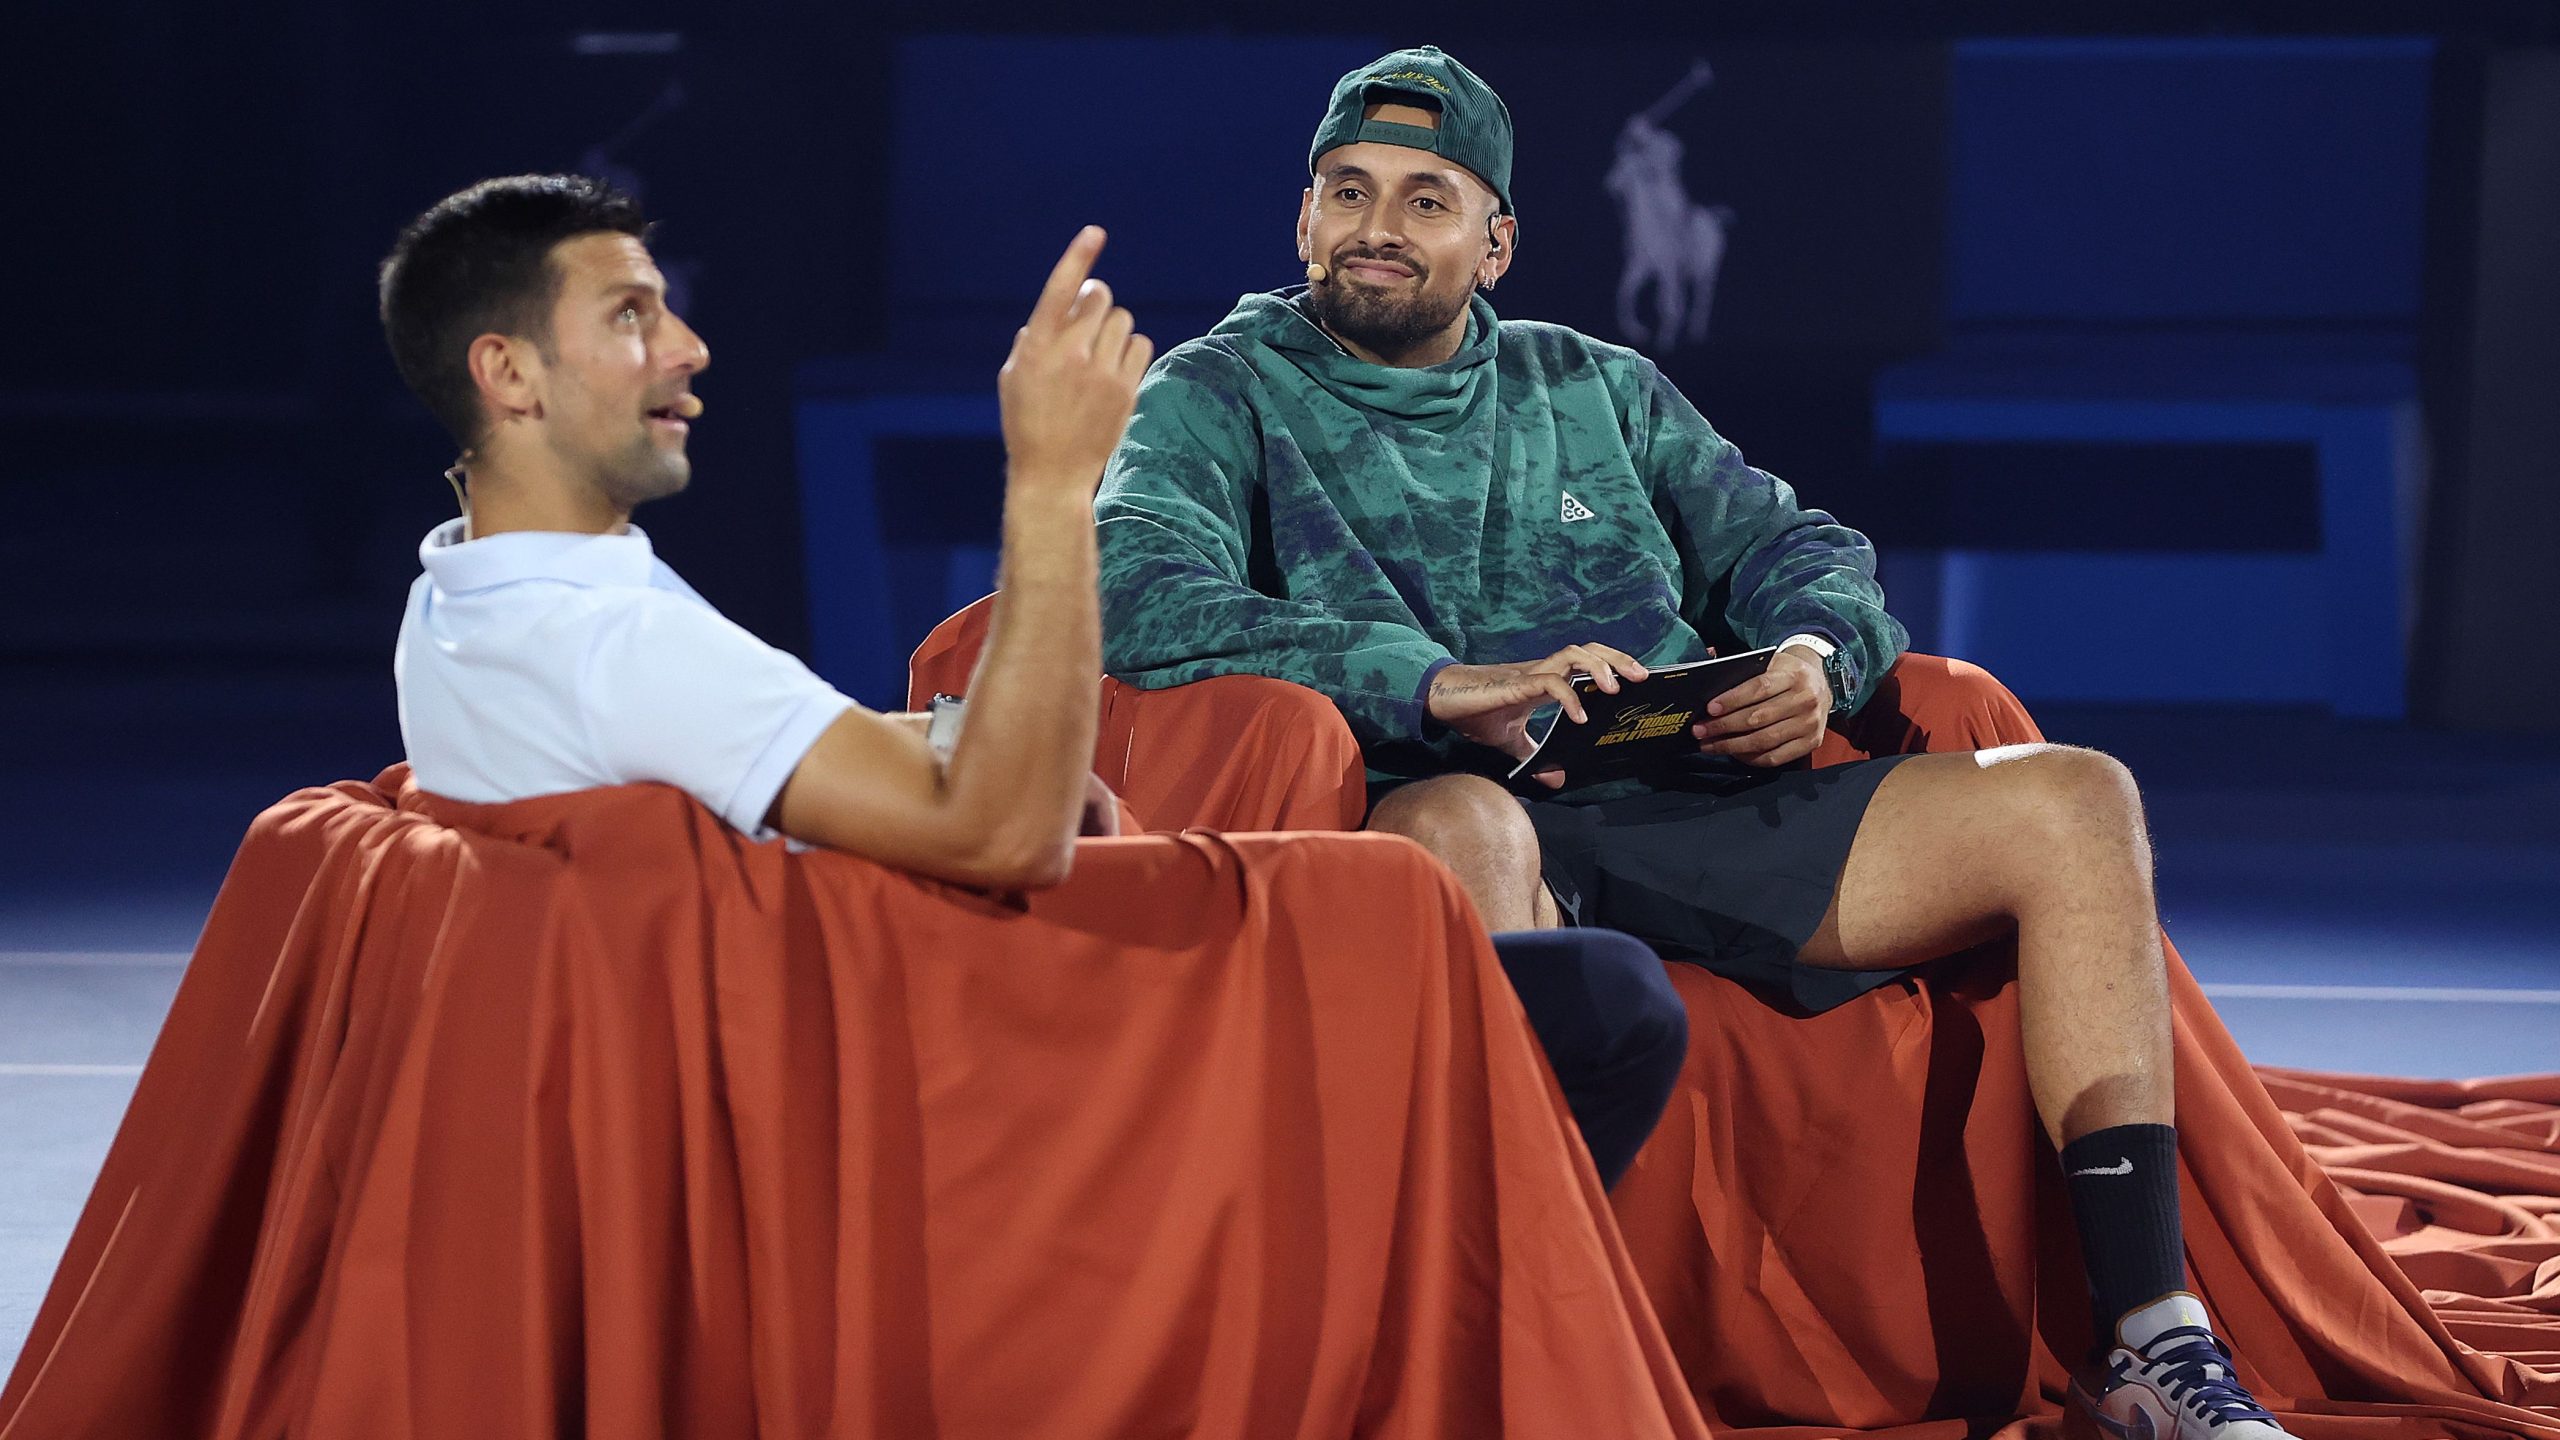 LIVE: Kyrgios offers to 'sort out' Djokovic heckler